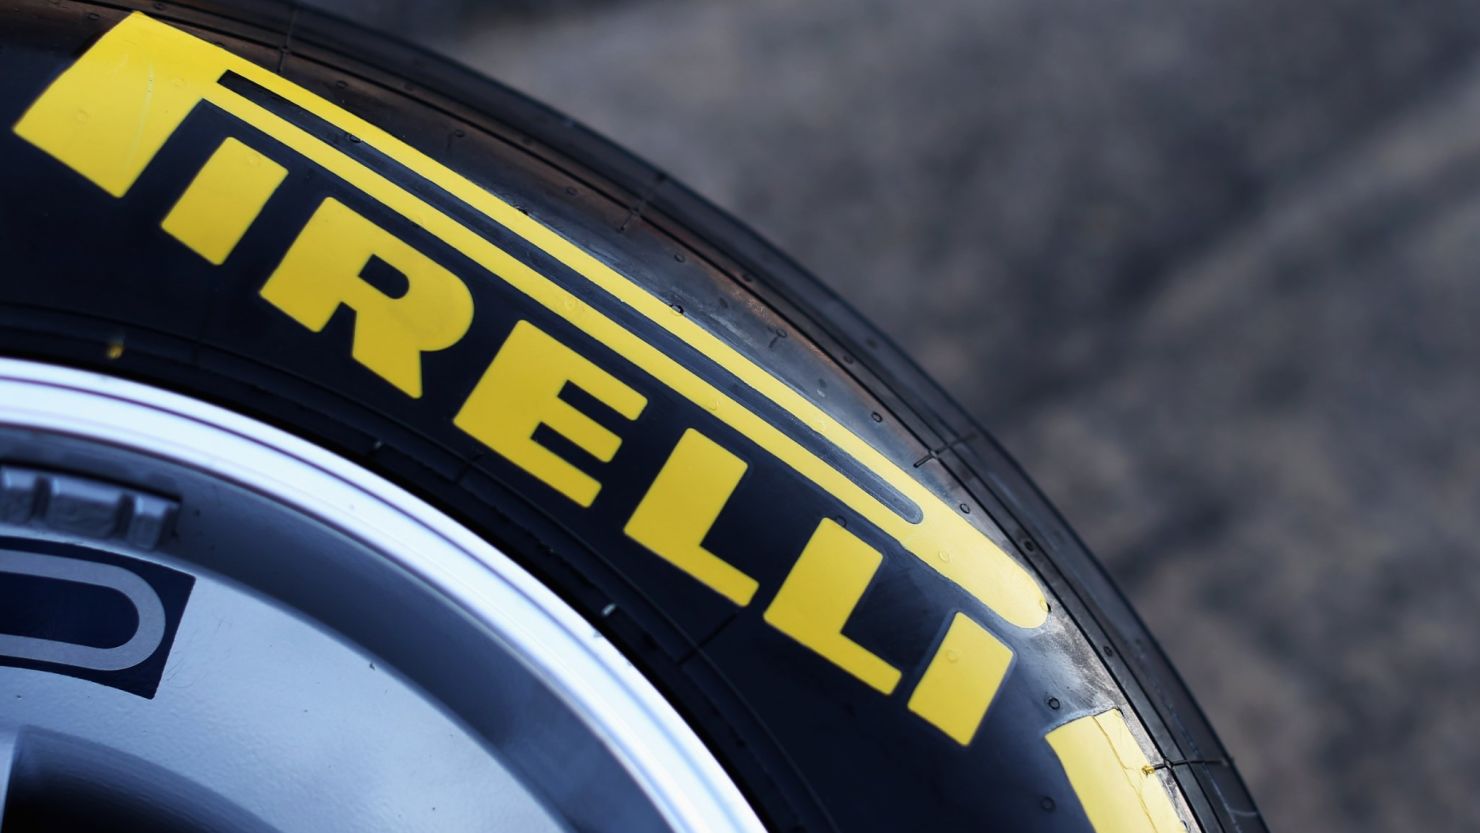 Tire supplier Pirelli says alll teams were invited to carry out  the test.